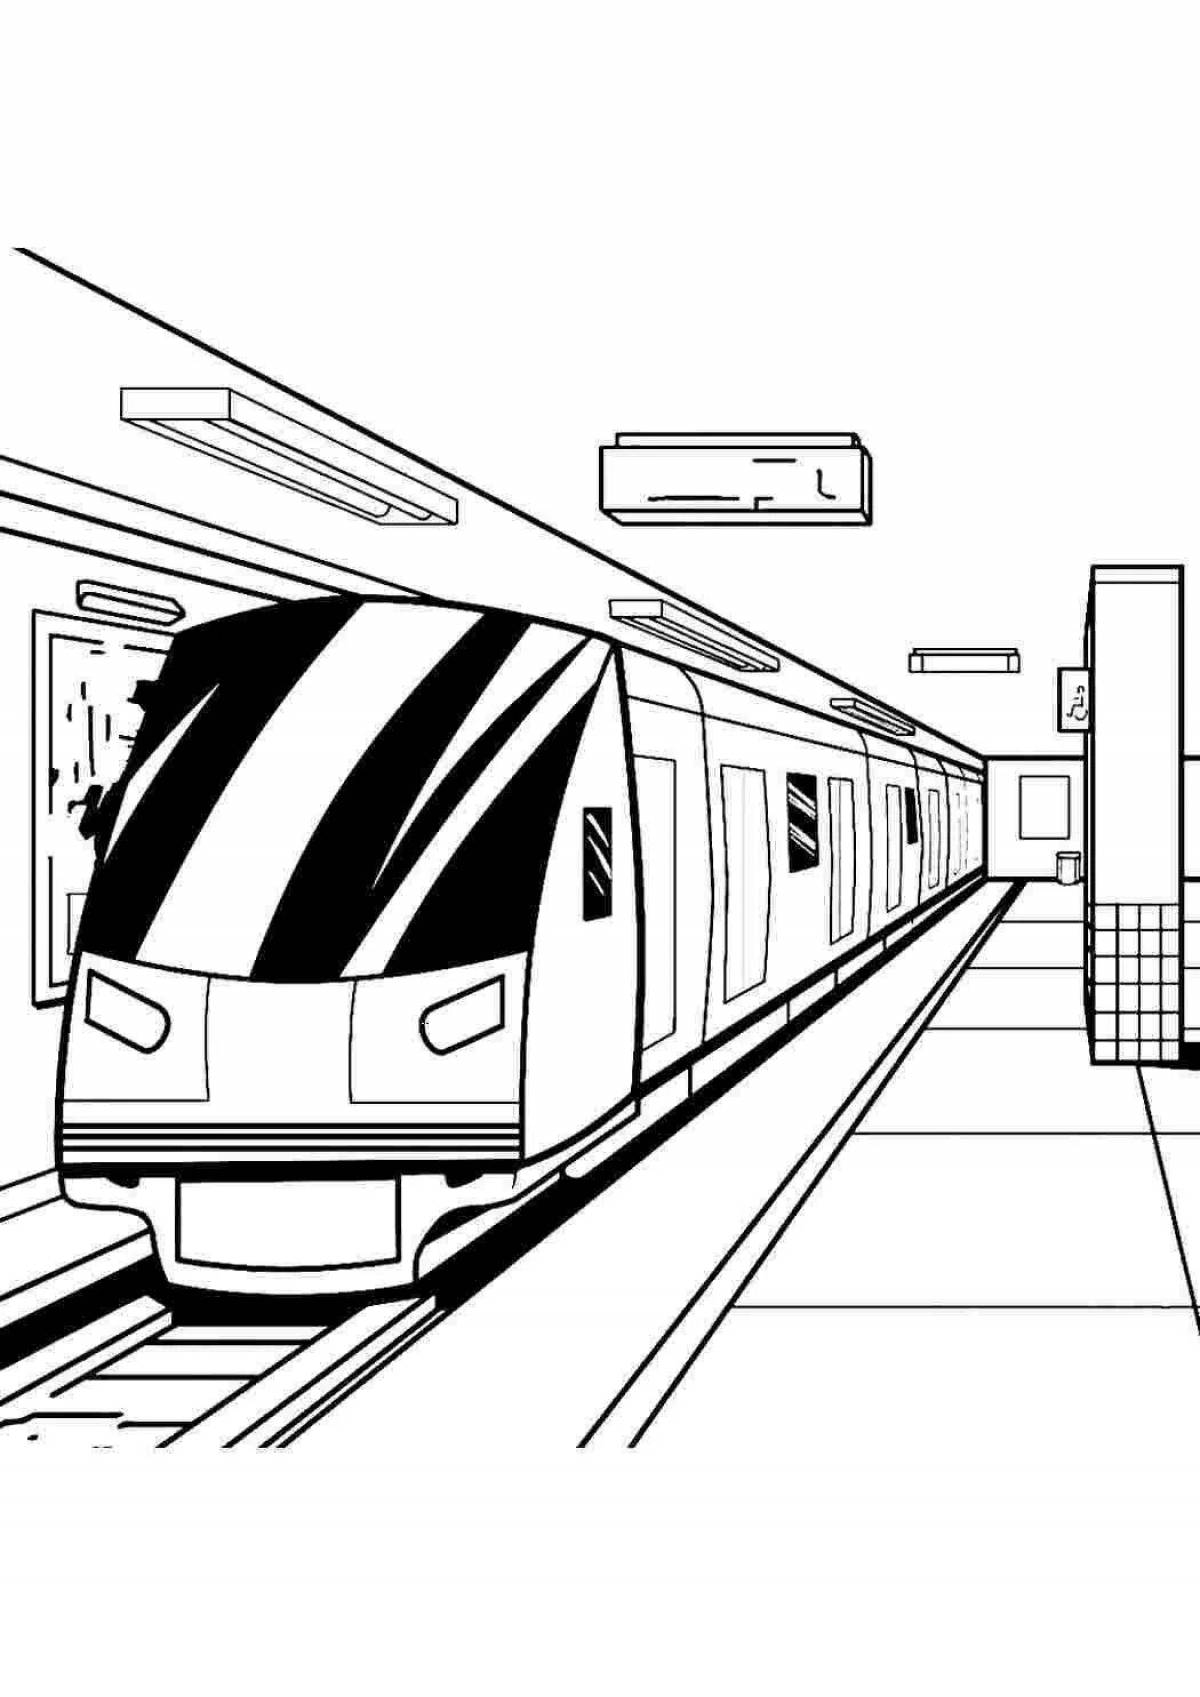 Fabulous underground car coloring page